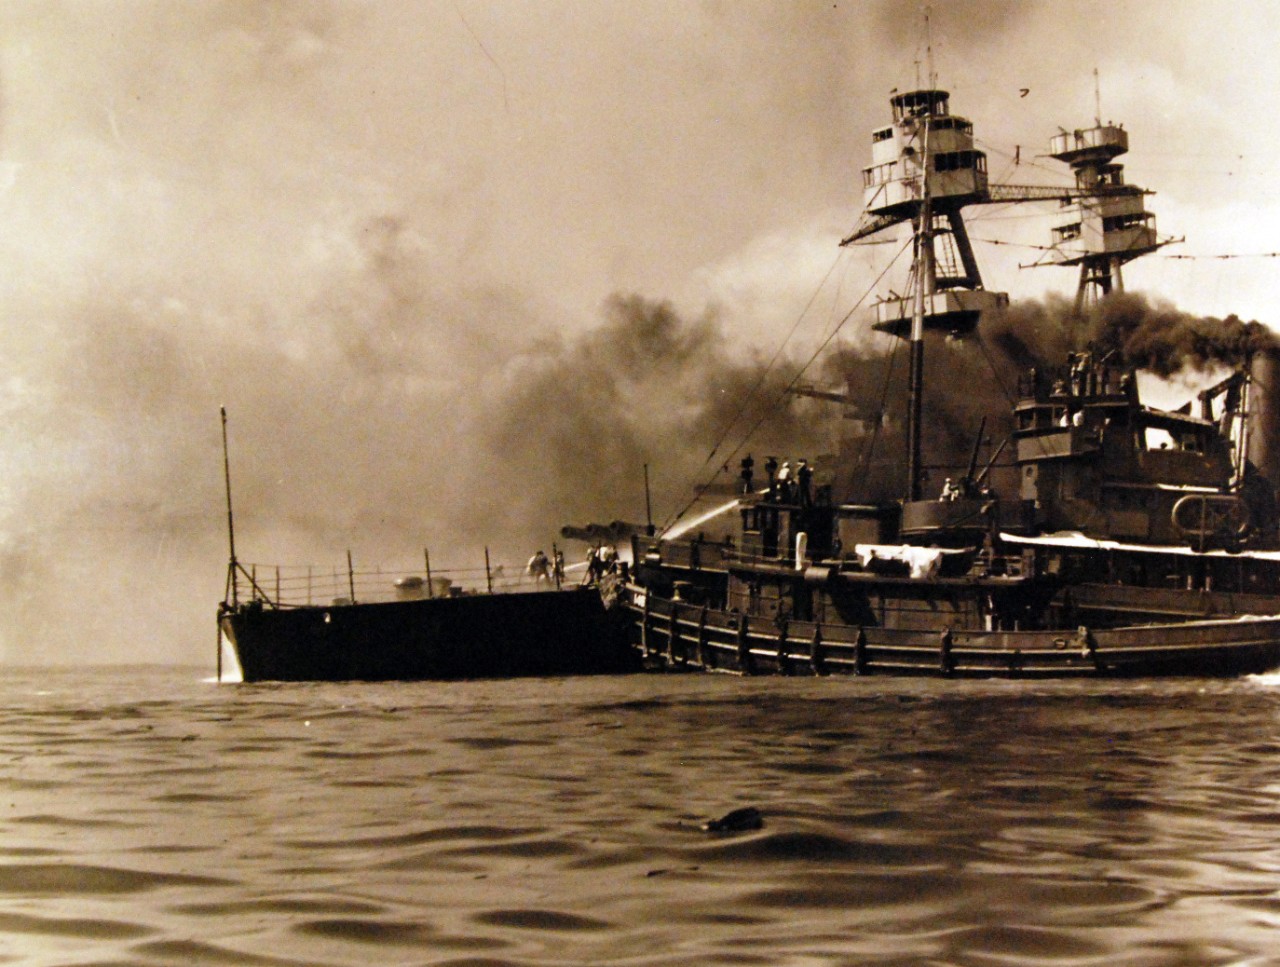 80-G-32743:   Japanese Attack on Pearl Harbor, December 7, 1941.   USS Hoga (YT 146) assisting USS Nevada (BB 36). Official U.S. Navy photograph, now in the collections of the National Archives.  (9/9/2015).